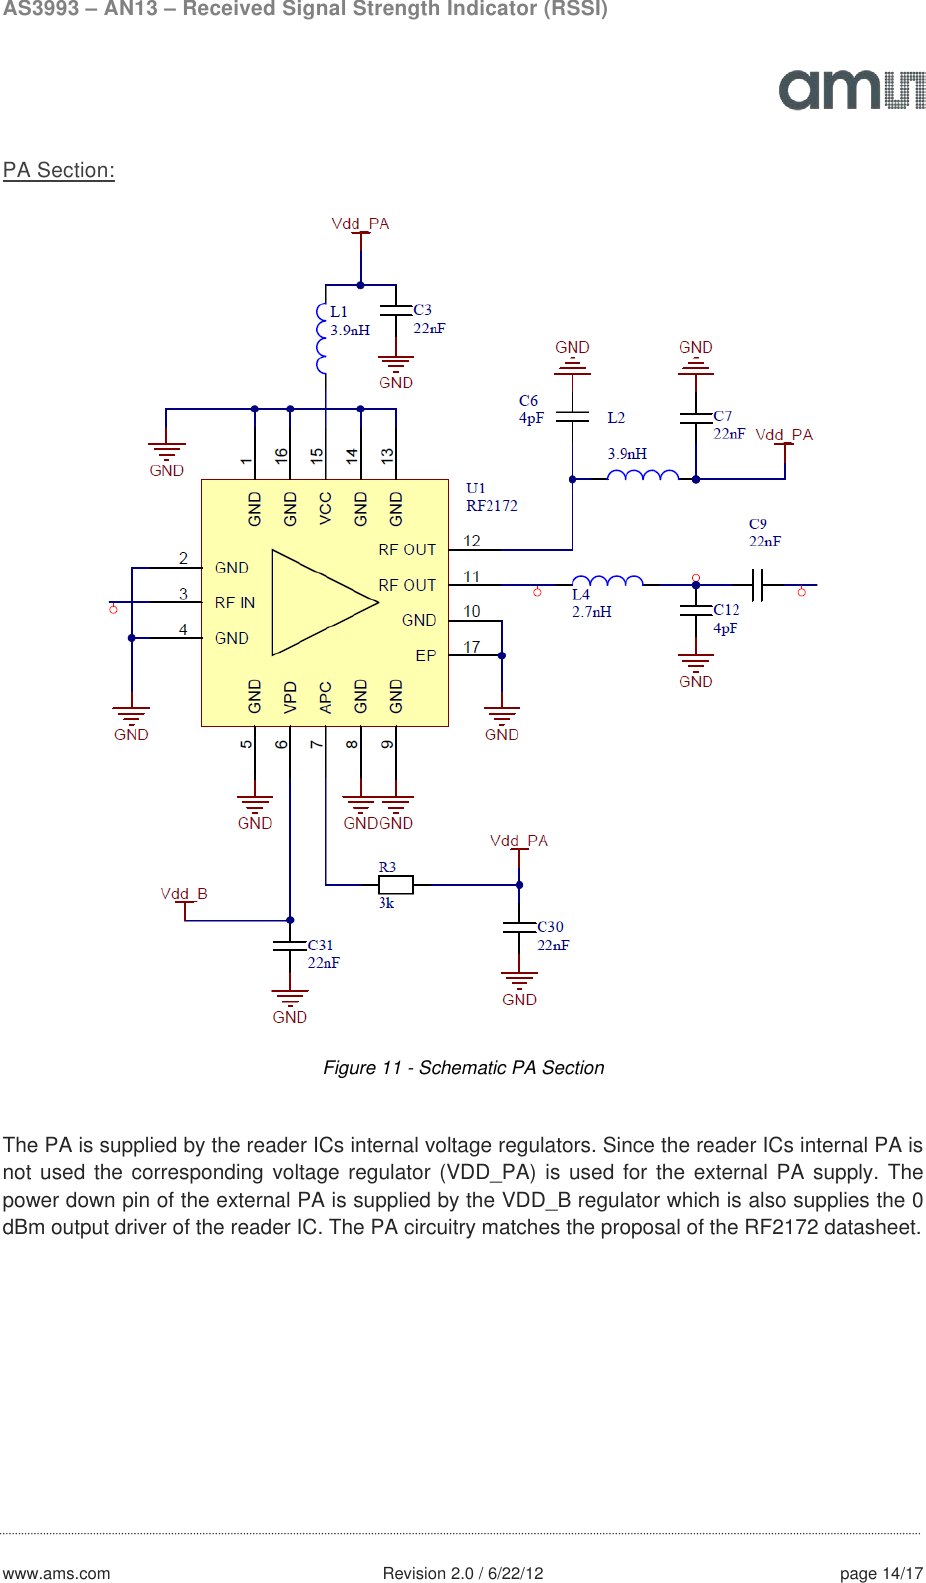 AS3993 – AN13 – Received Signal Strength Indicator (RSSI)  www.ams.com              Revision 2.0 / 6/22/12 page 14/17  PA Section:  Figure 11 - Schematic PA Section  The PA is supplied by the reader ICs internal voltage regulators. Since the reader ICs internal PA is not used the corresponding voltage regulator (VDD_PA) is used for the external PA supply. The power down pin of the external PA is supplied by the VDD_B regulator which is also supplies the 0 dBm output driver of the reader IC. The PA circuitry matches the proposal of the RF2172 datasheet.    